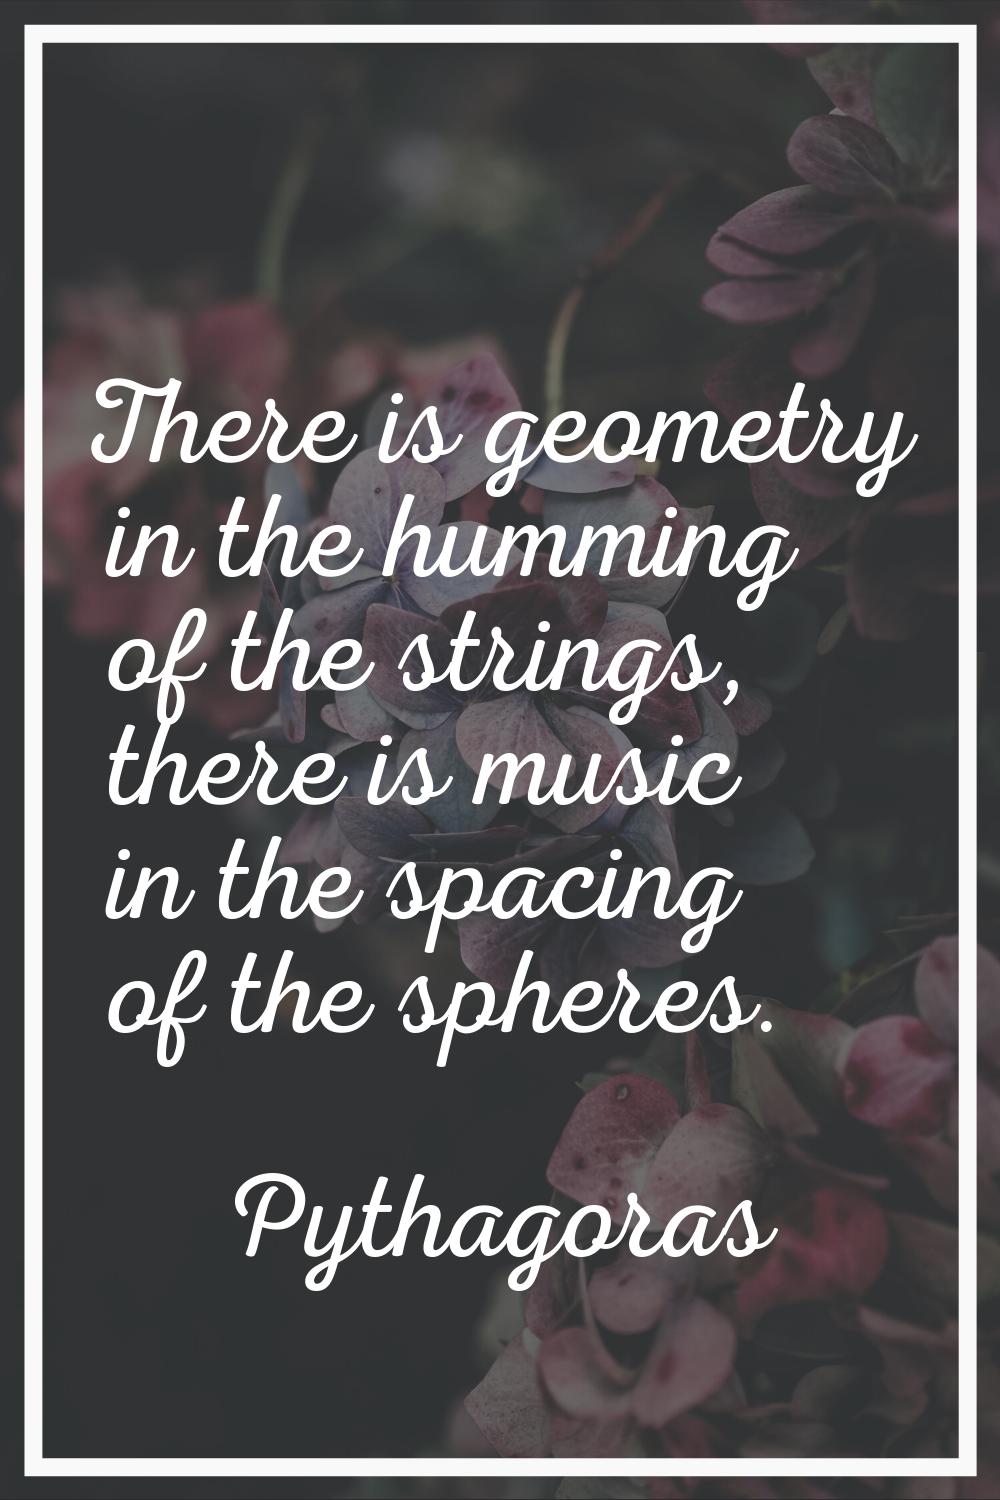 There is geometry in the humming of the strings, there is music in the spacing of the spheres.